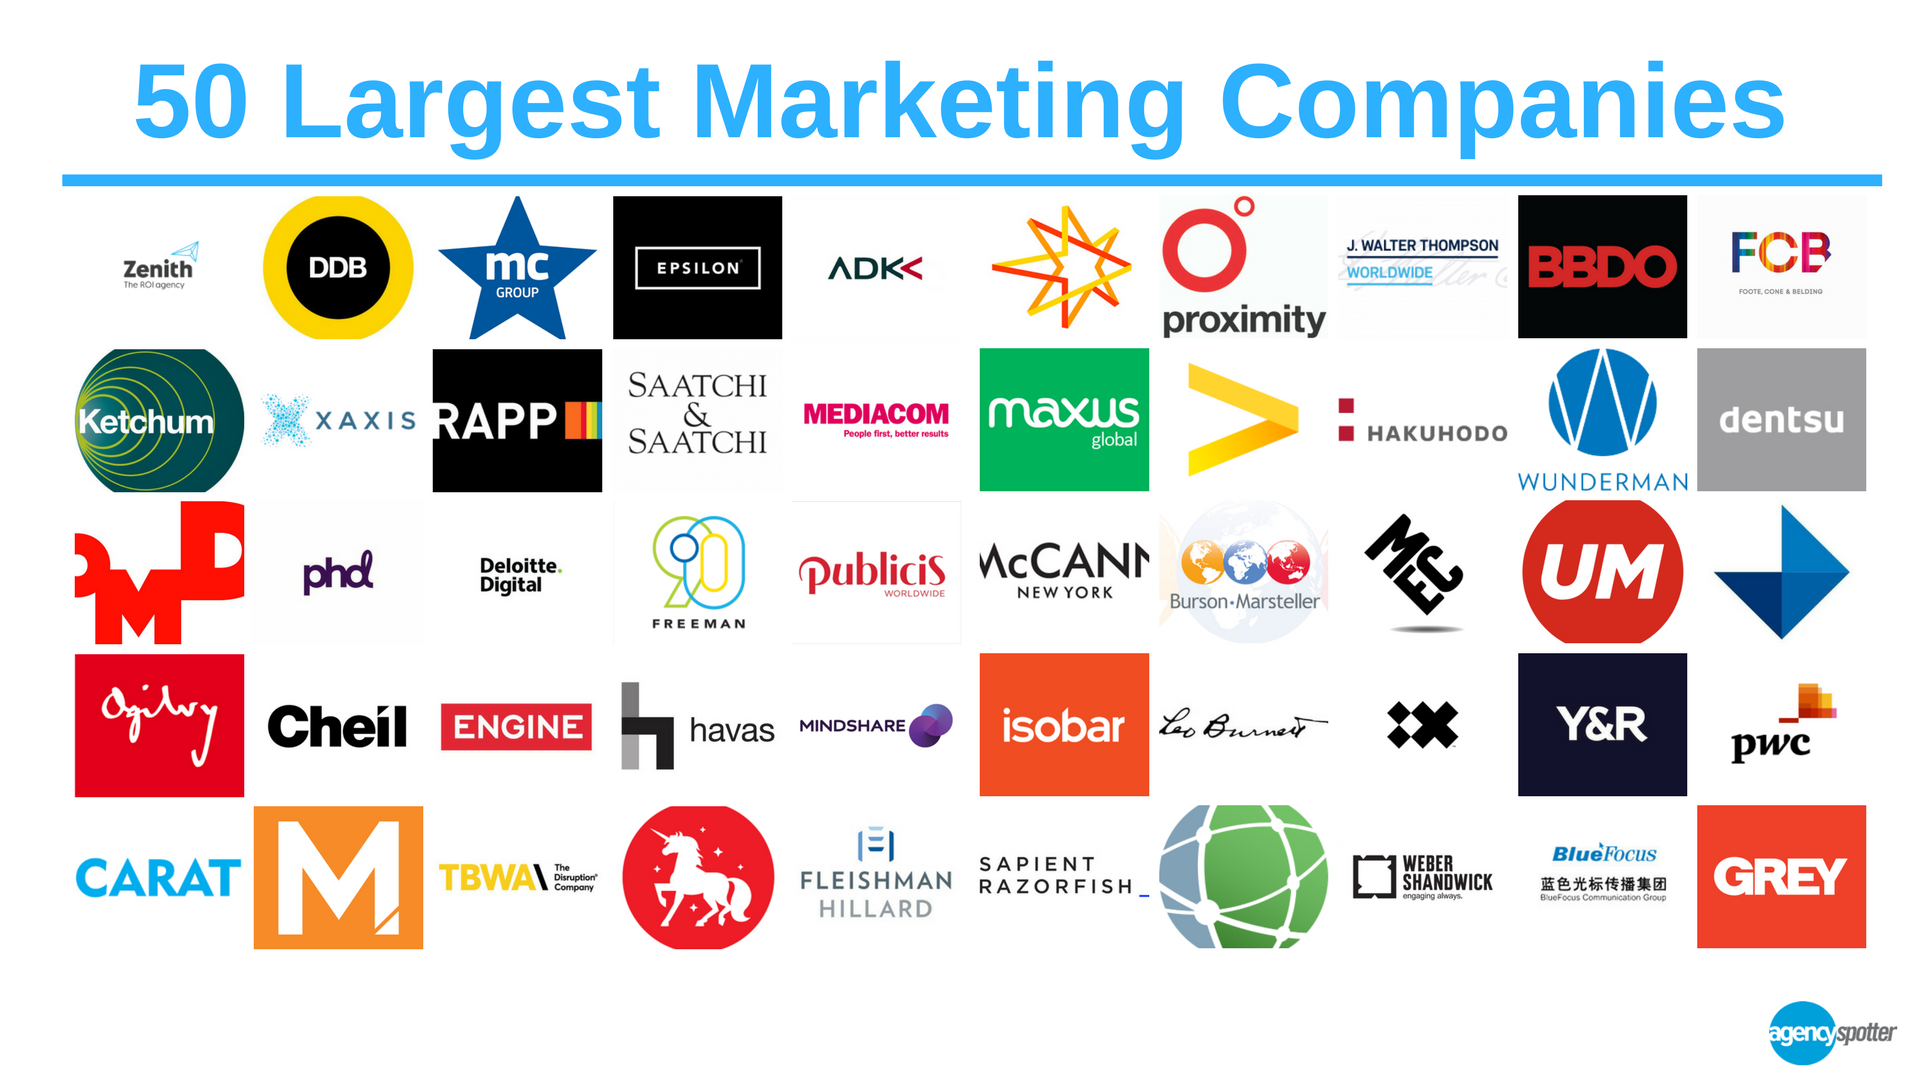 50 Largest Marketing Companies in the World